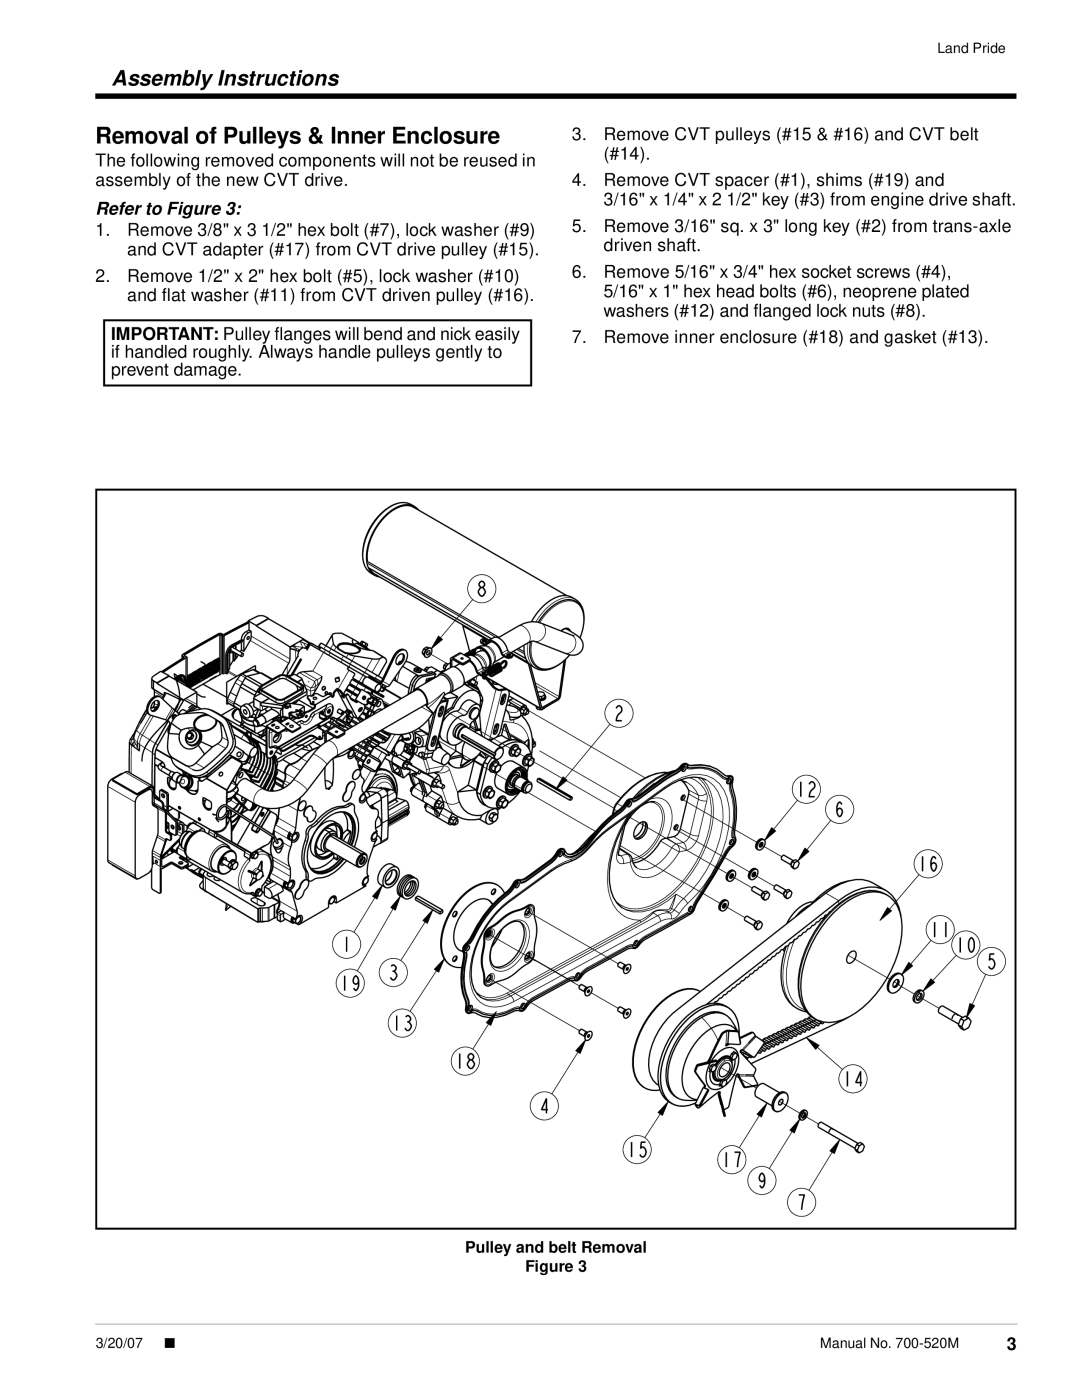 Land Pride 4210 installation instructions Removal of Pulleys & Inner Enclosure, Assembly Instructions, Refer to Figure 